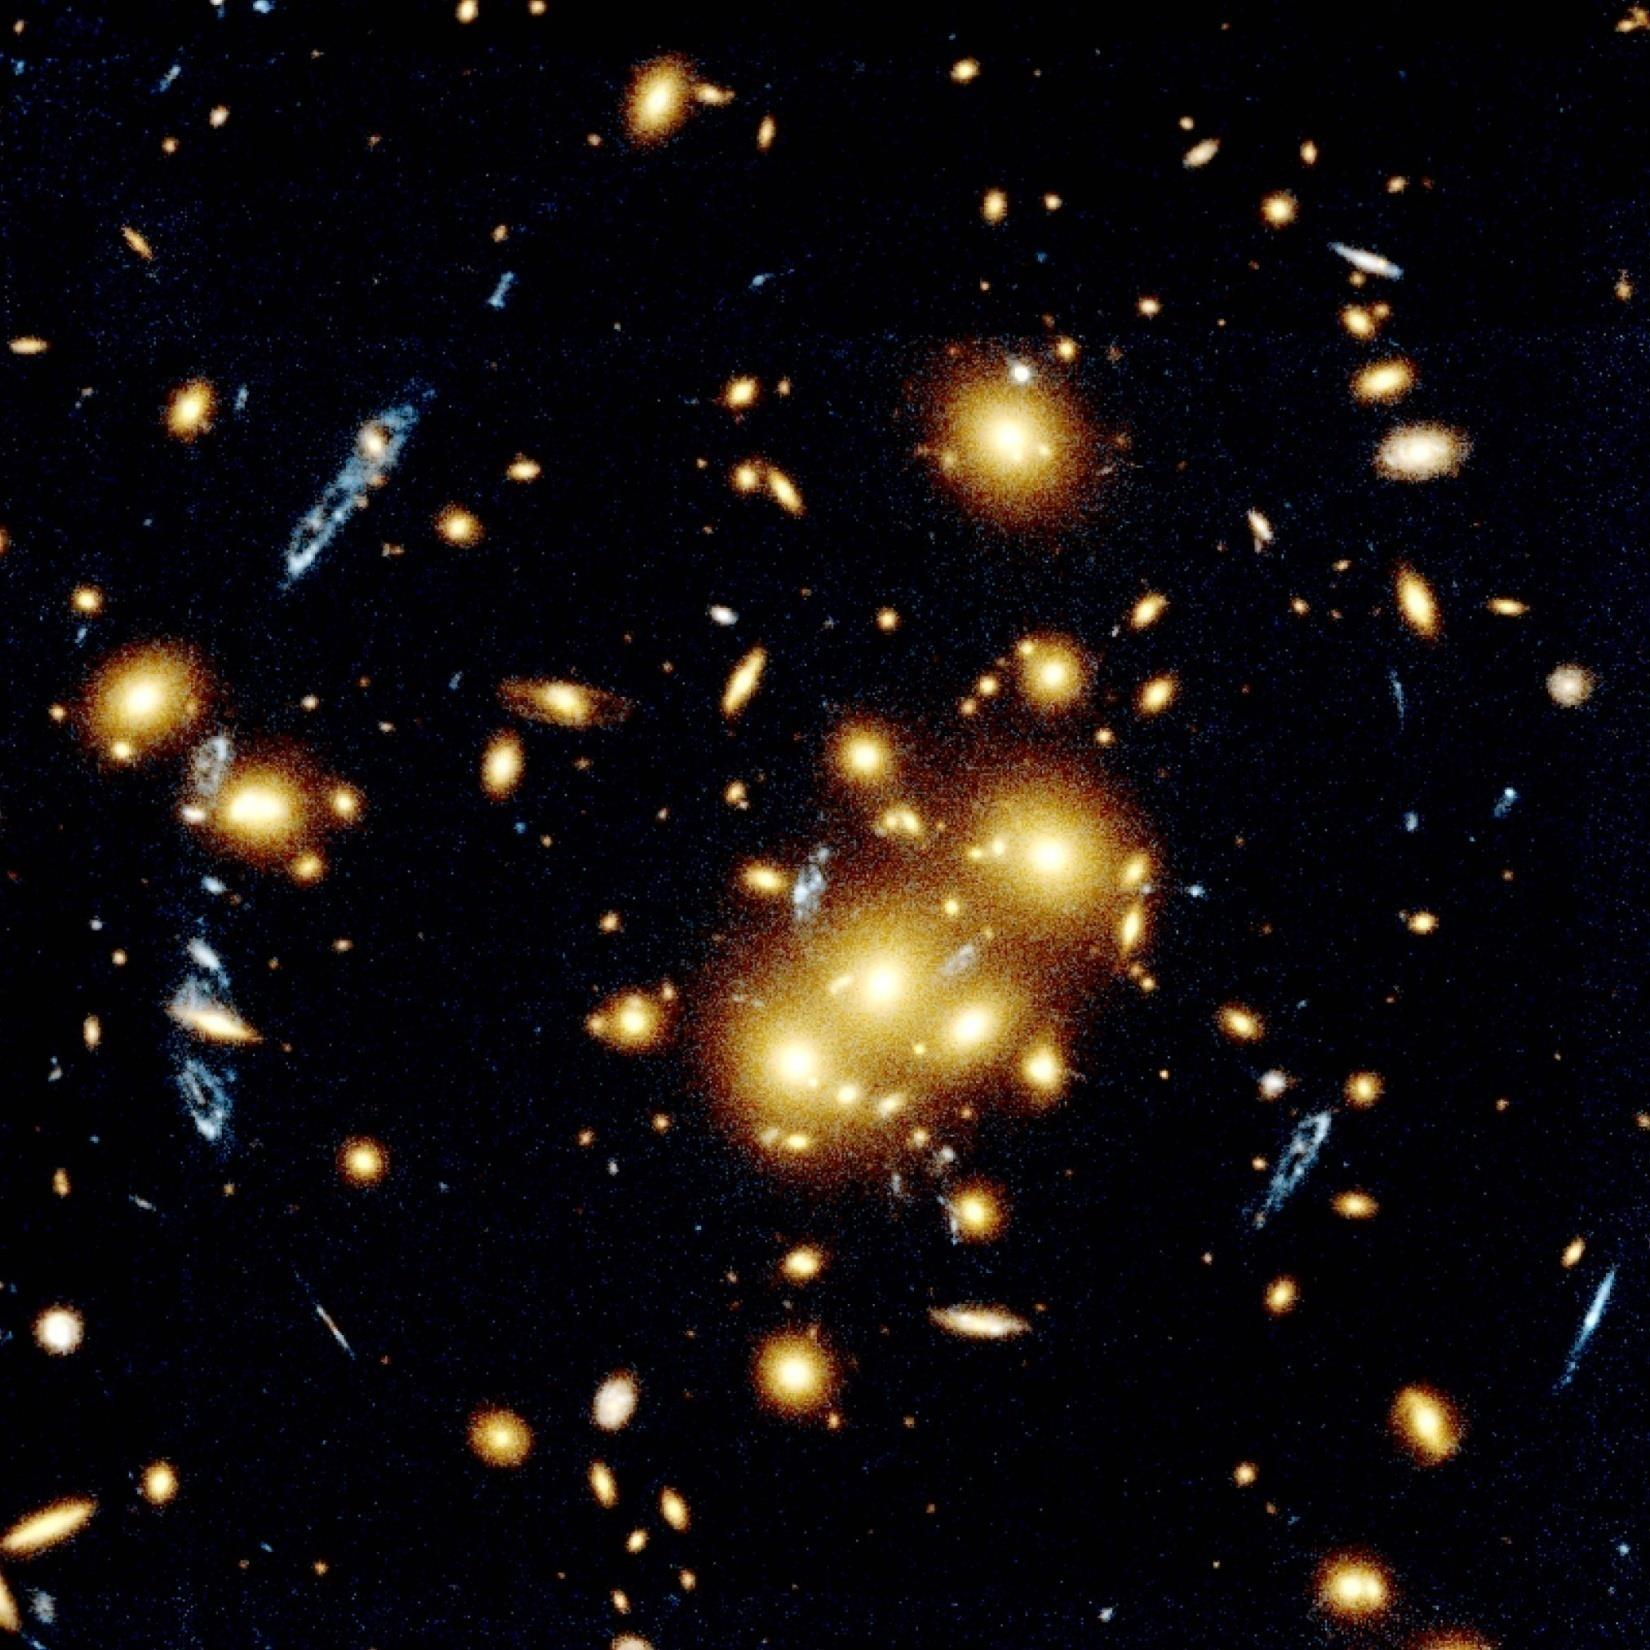 Cluster of galaxies C10024+1654, Hubble